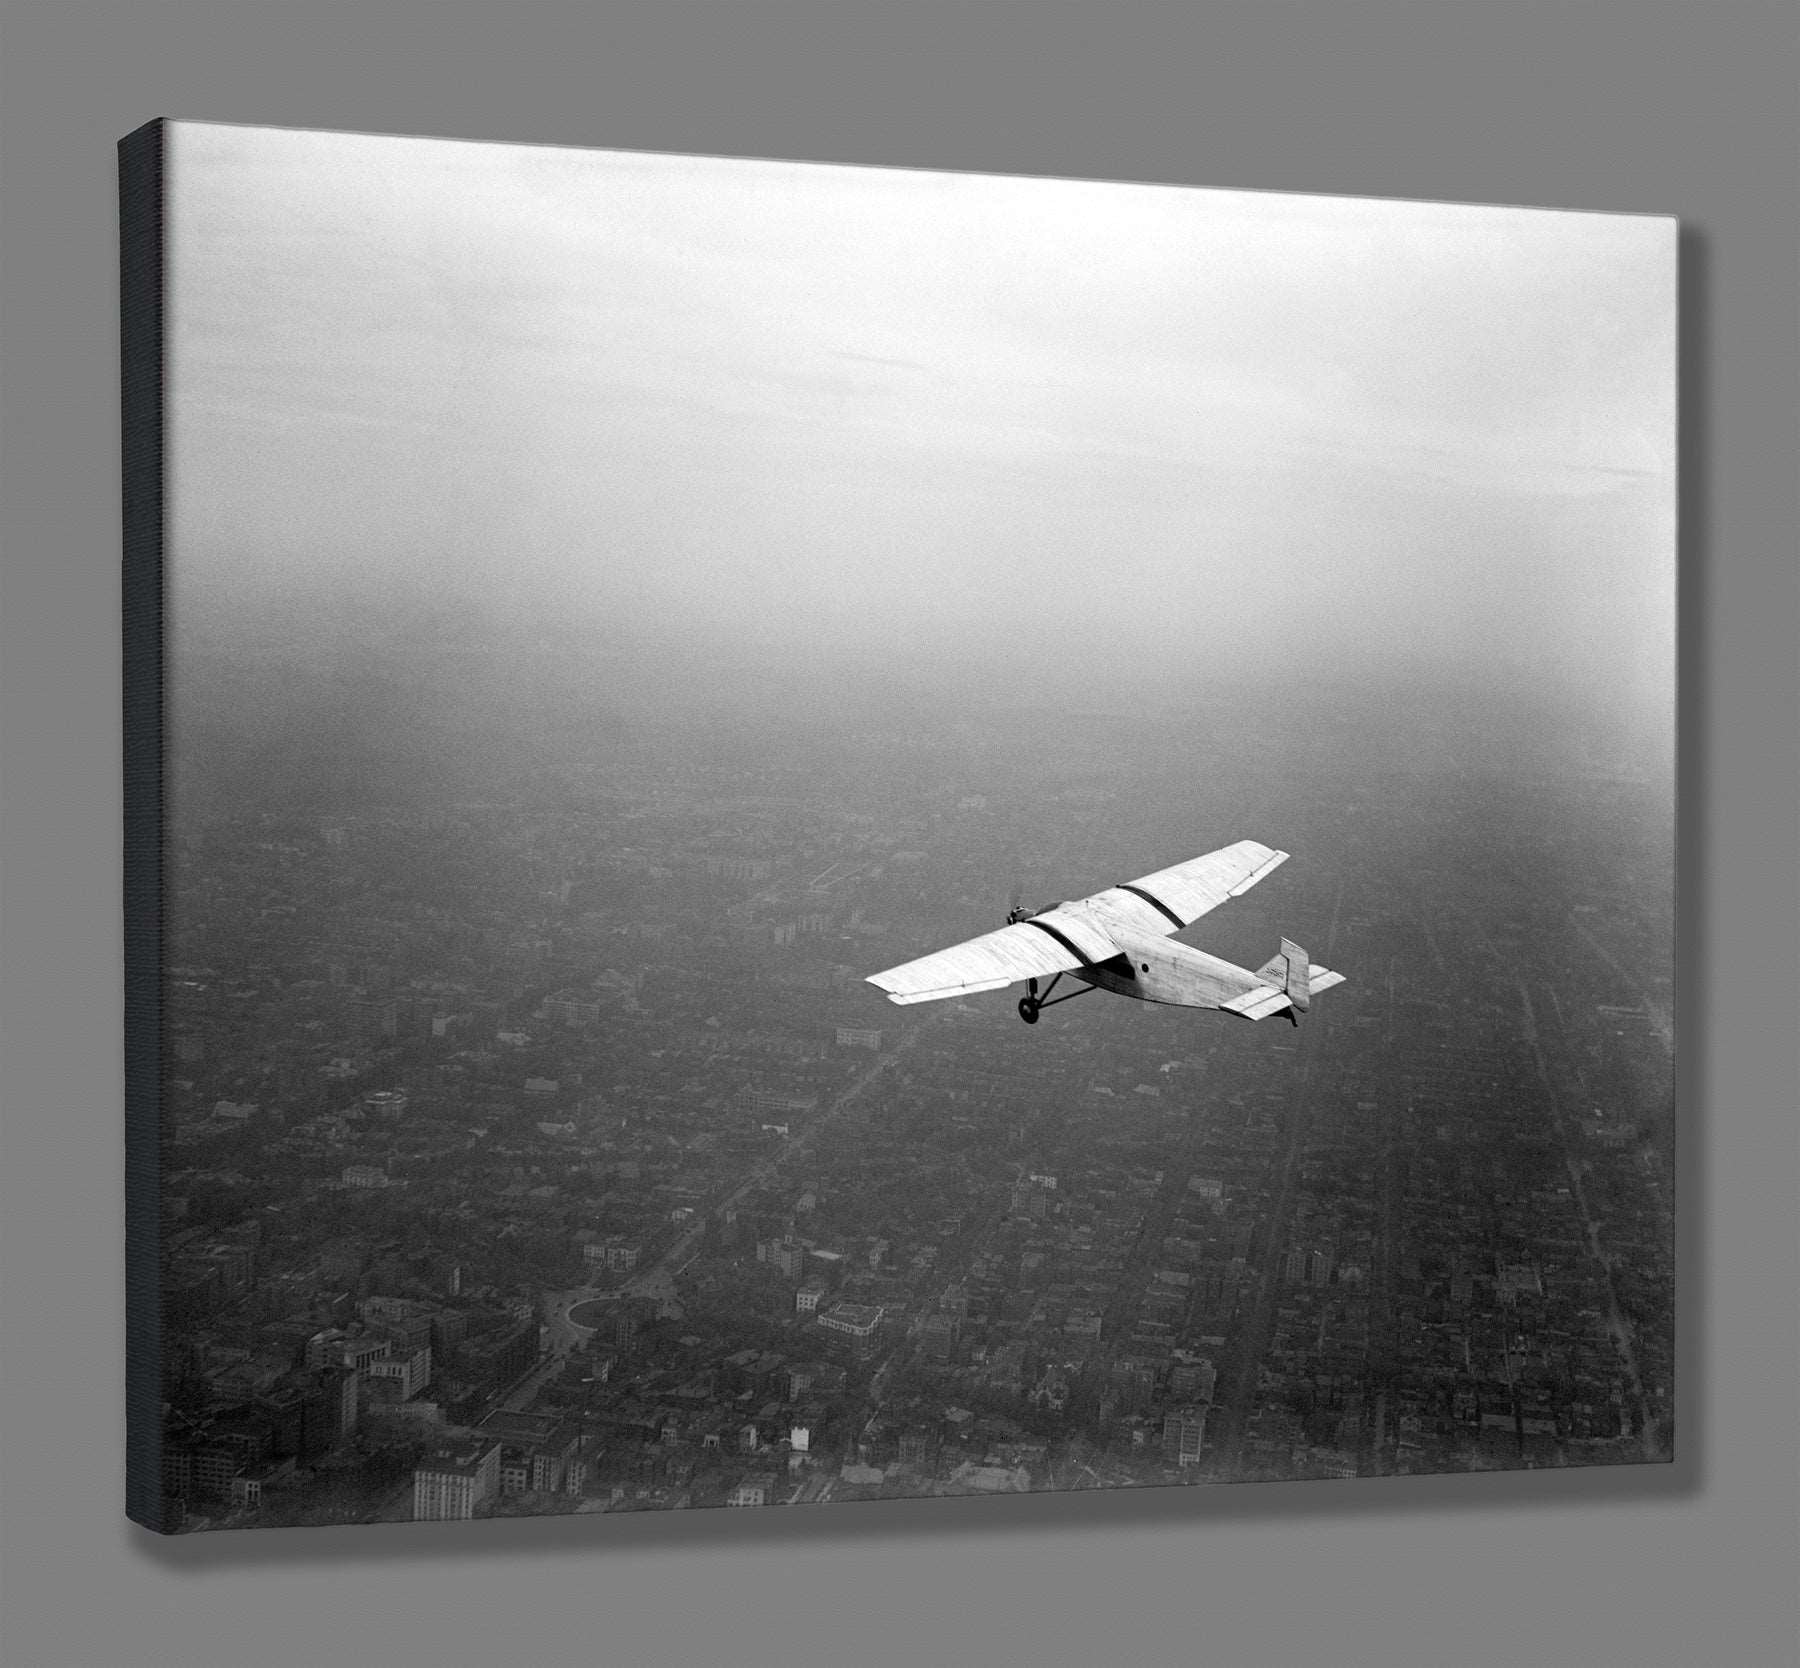 A canvas print reproduction of a vintage photograph of a Ford Motor Co Plane in flight